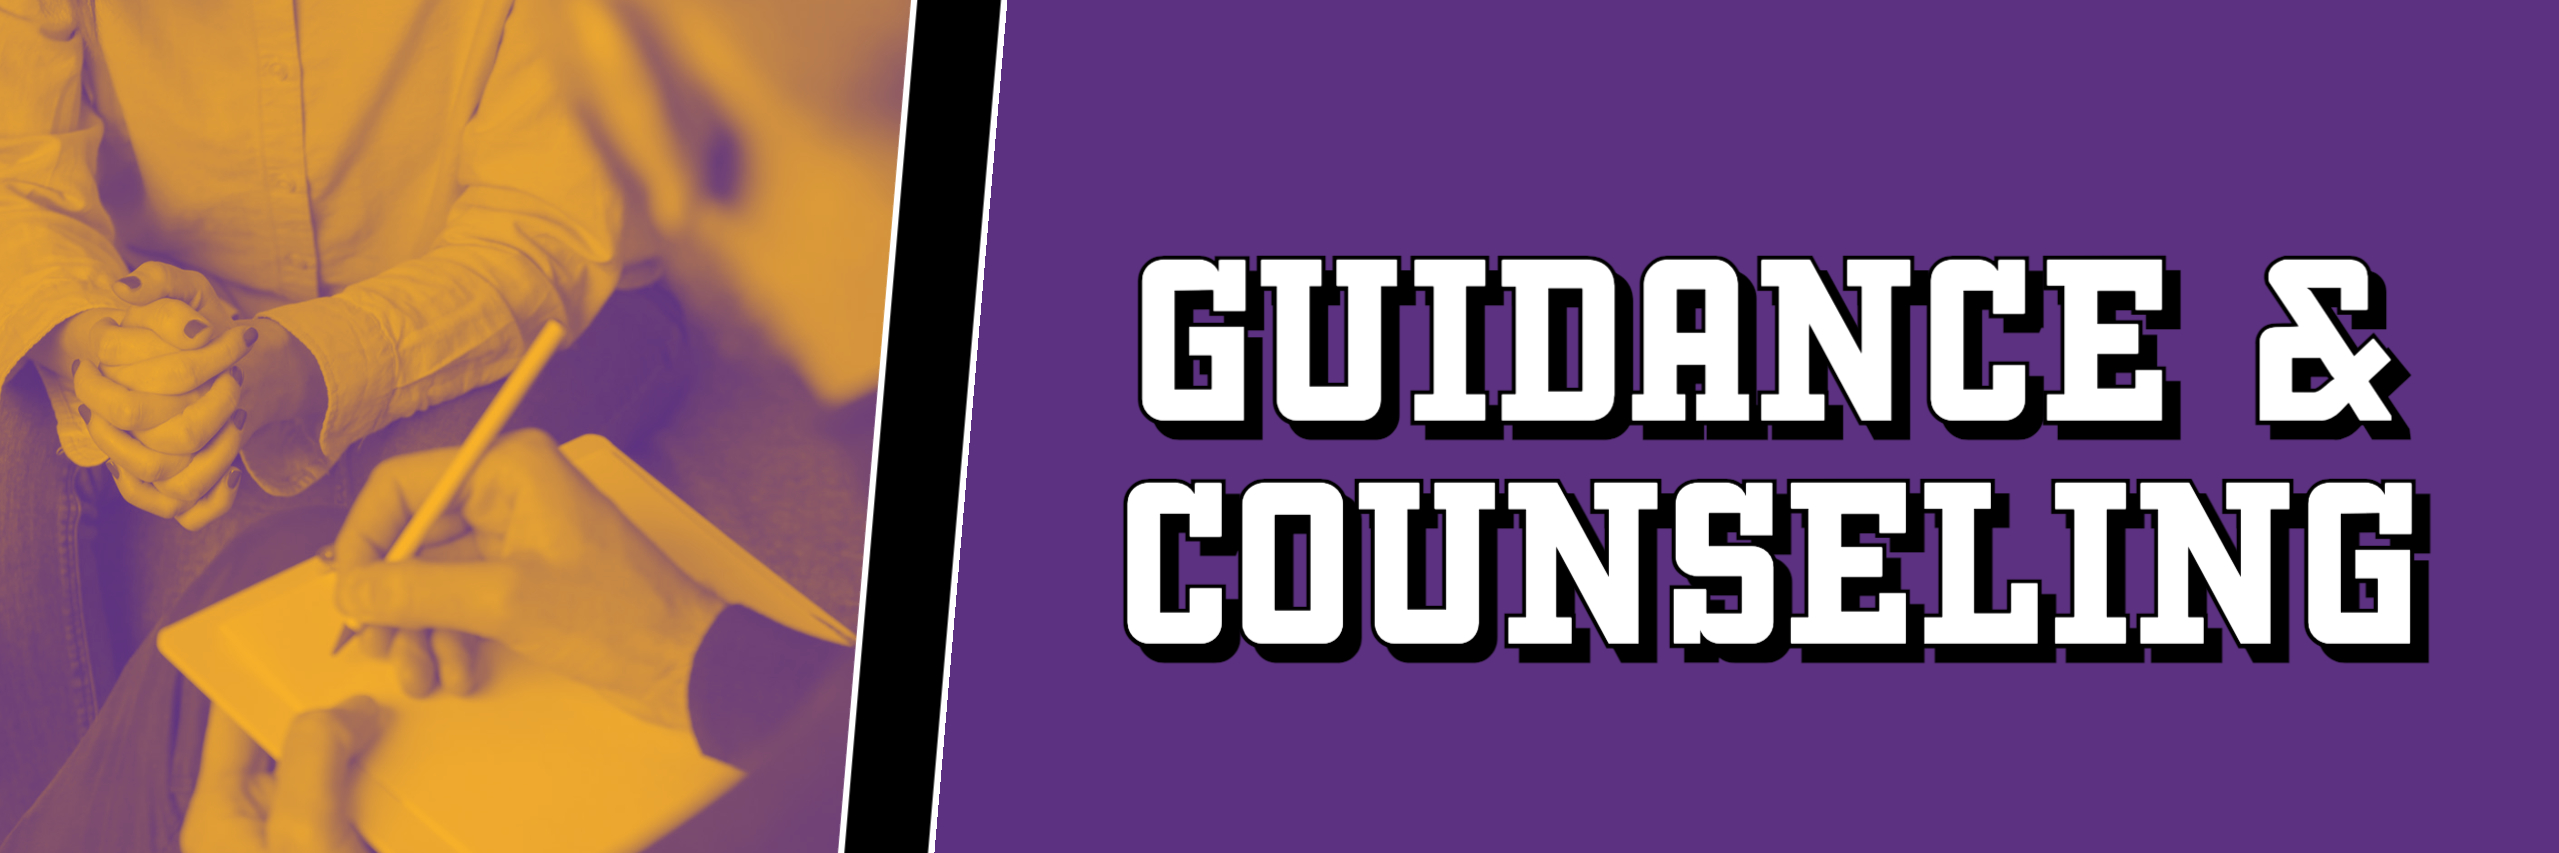 guidance-counseling-banner